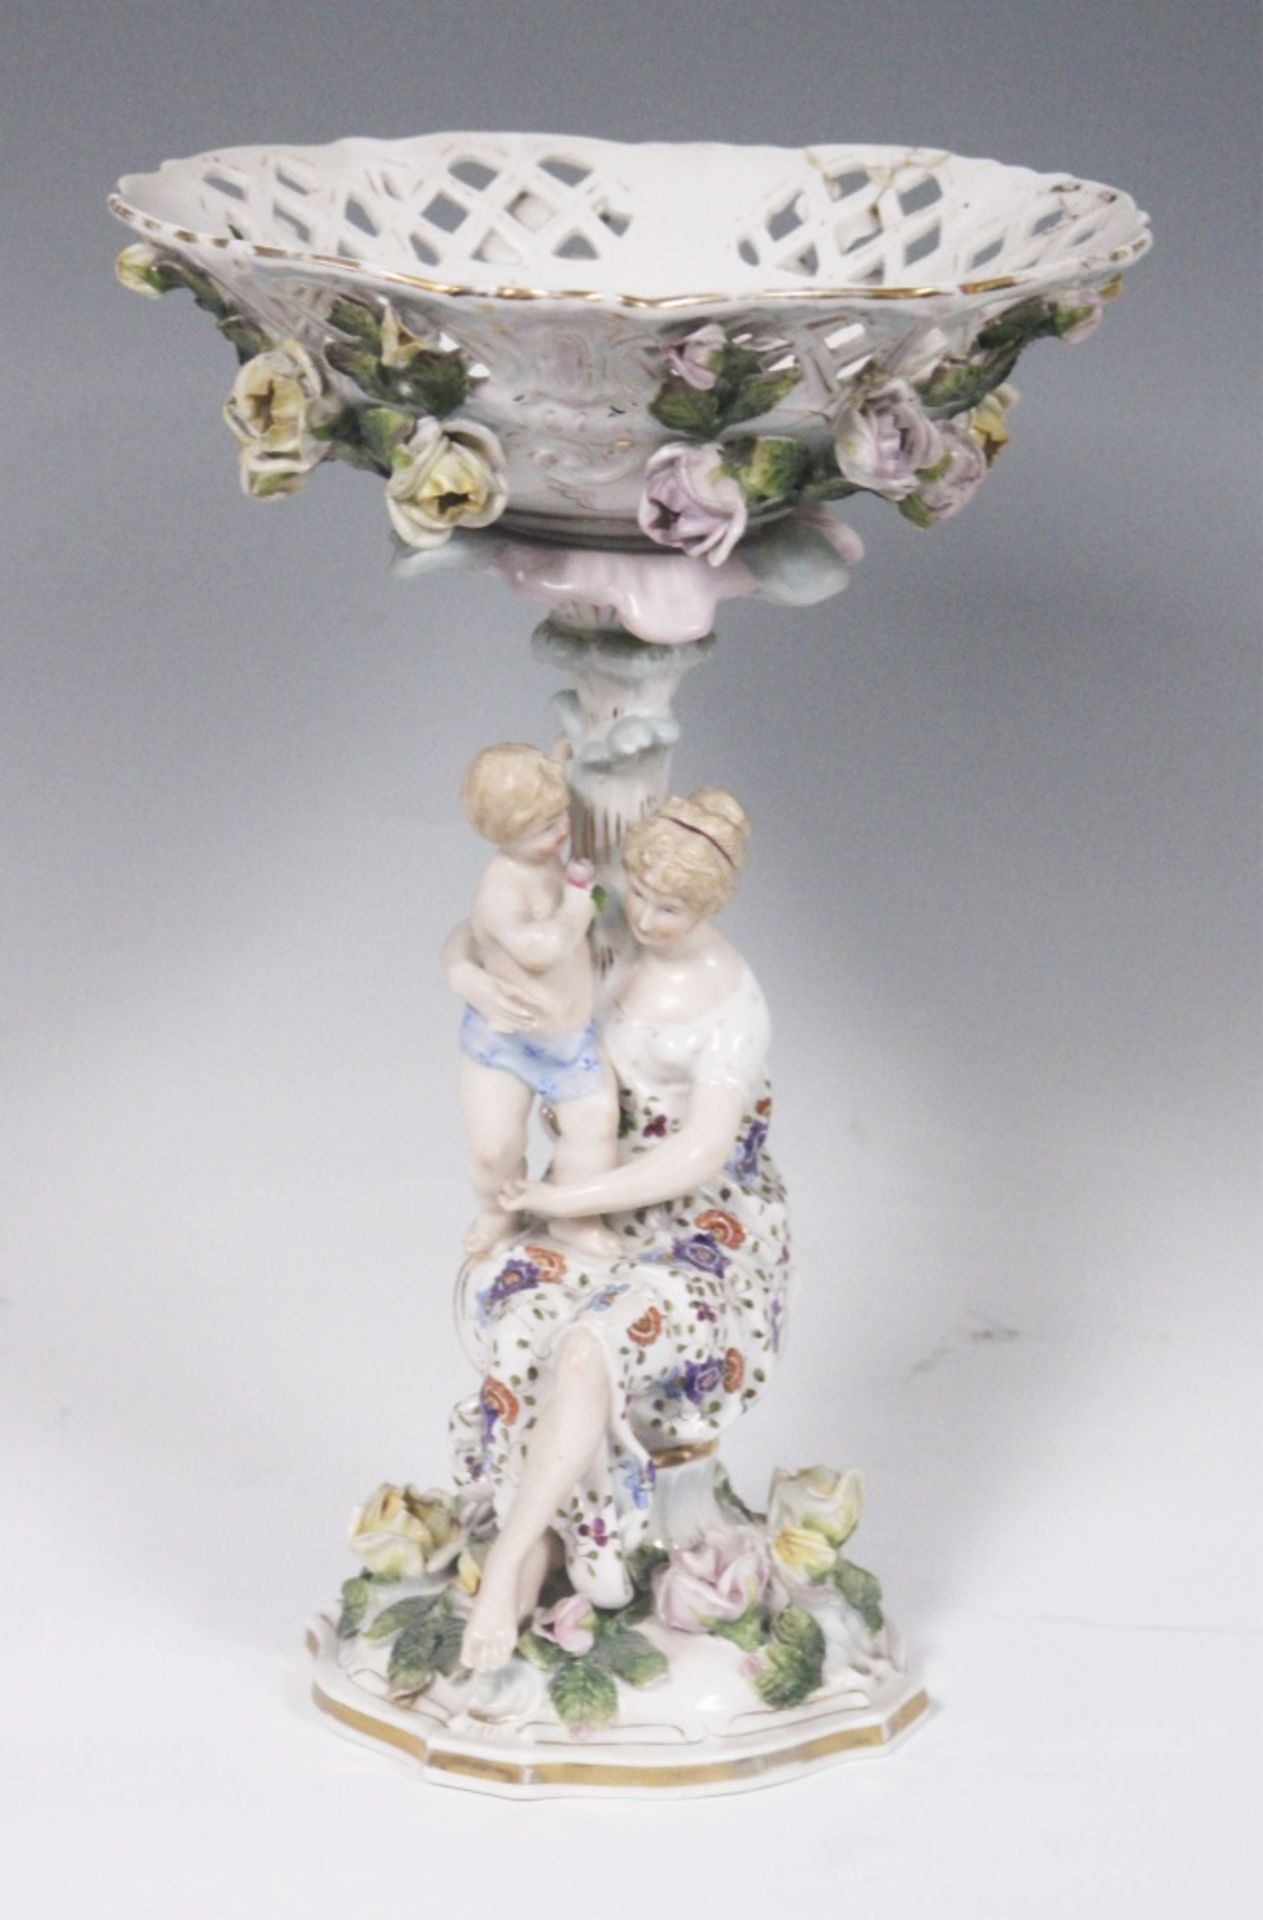 CONTINETAL 19TH FIGURAL PORCELAIN COMPOTE